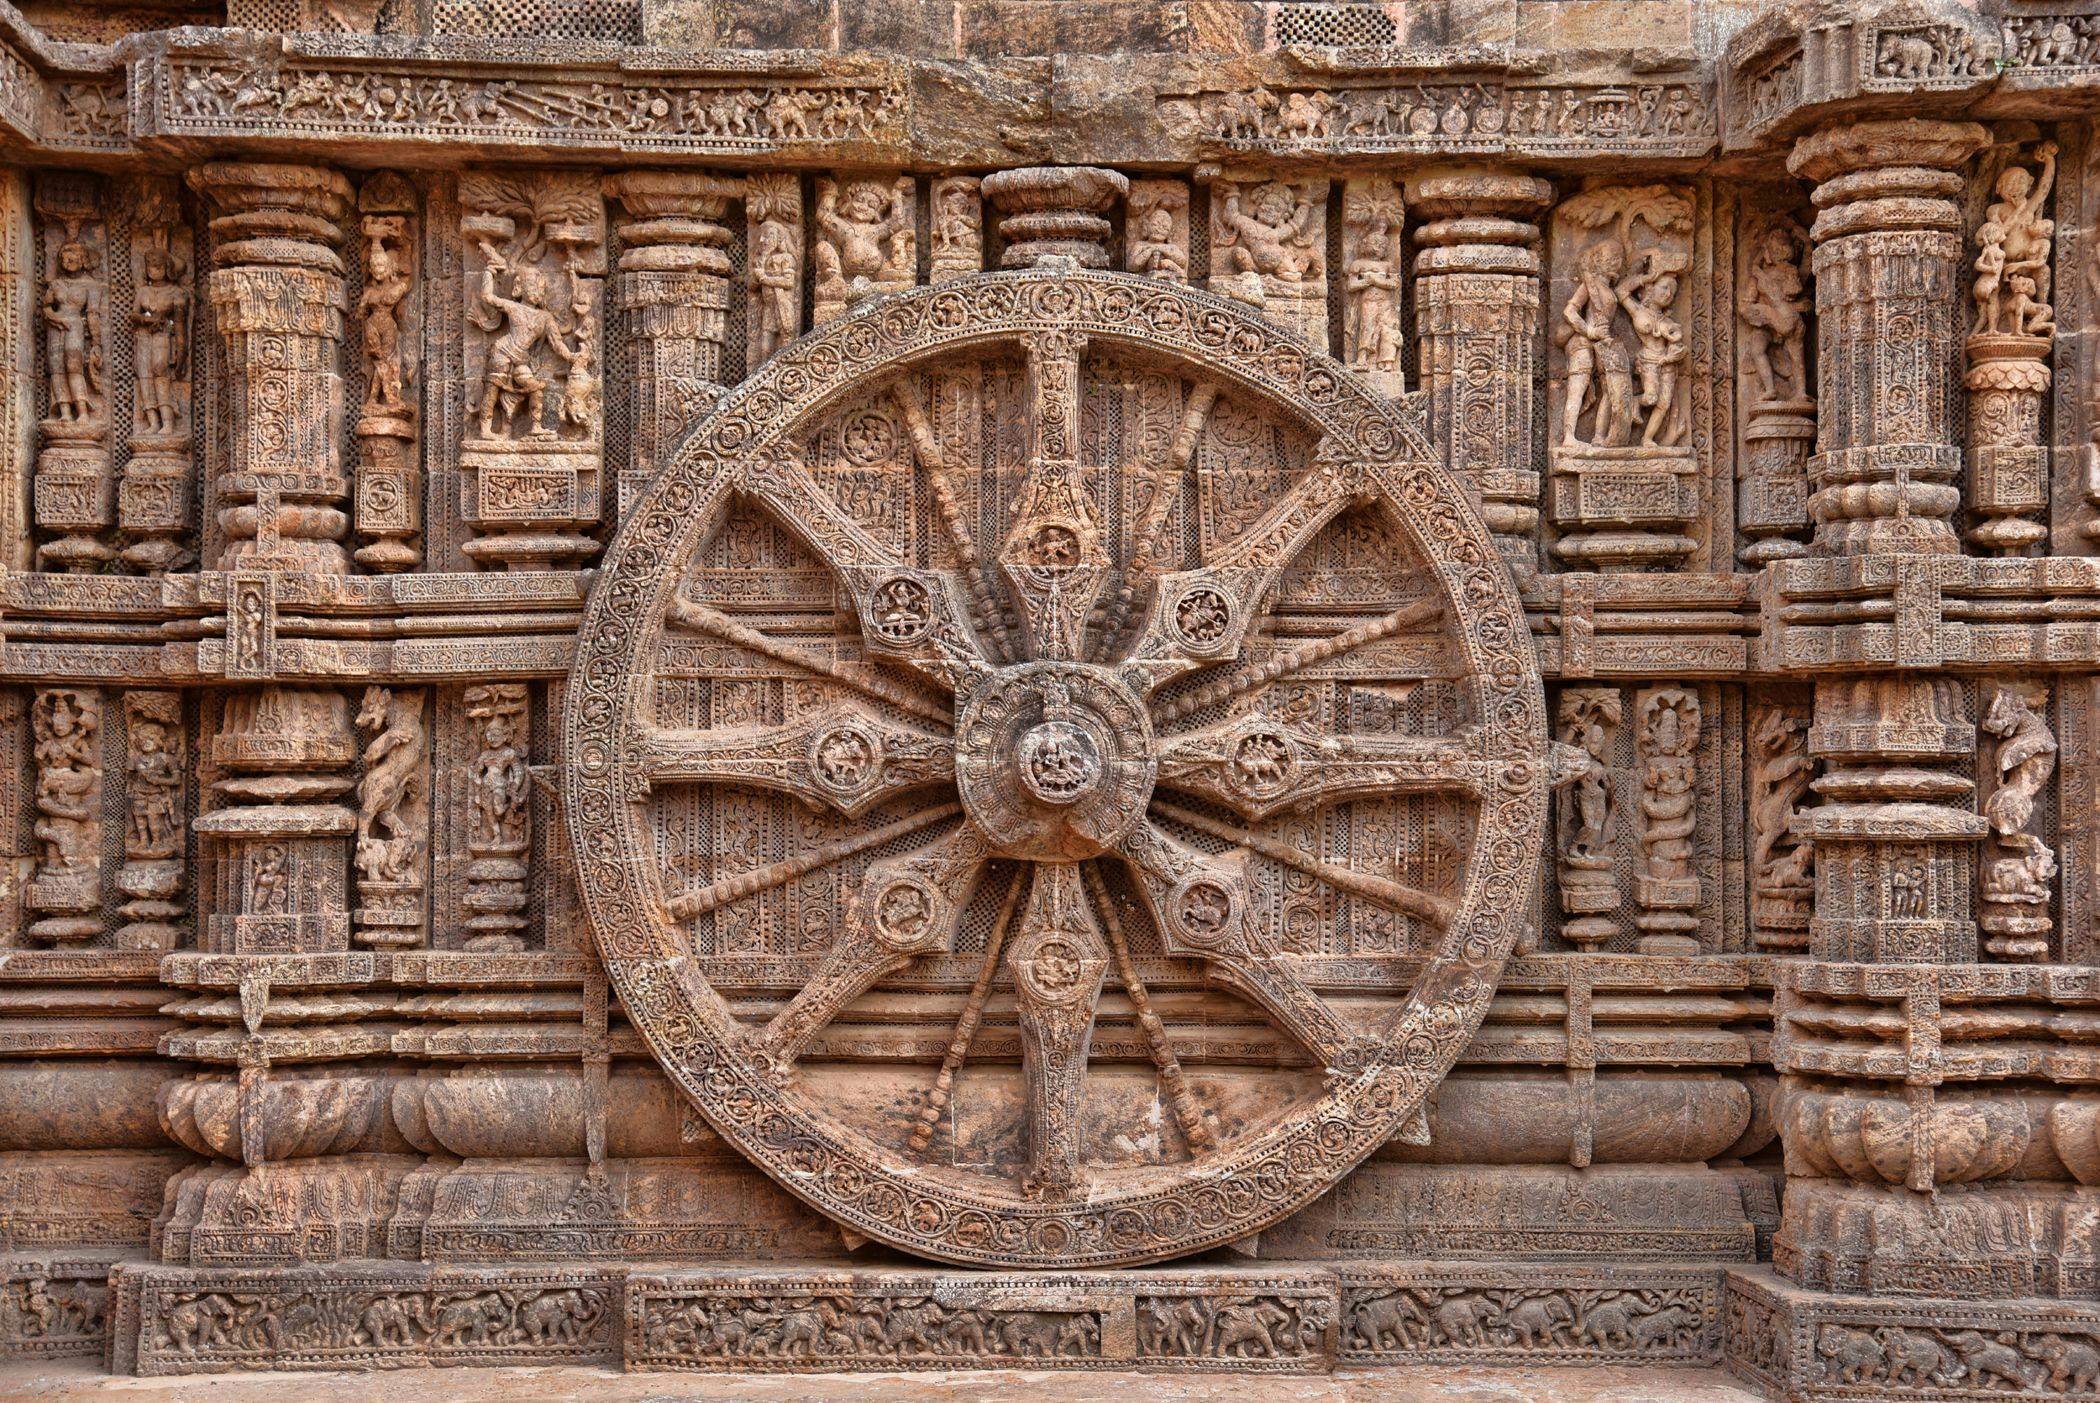 One of the ornamented wheels